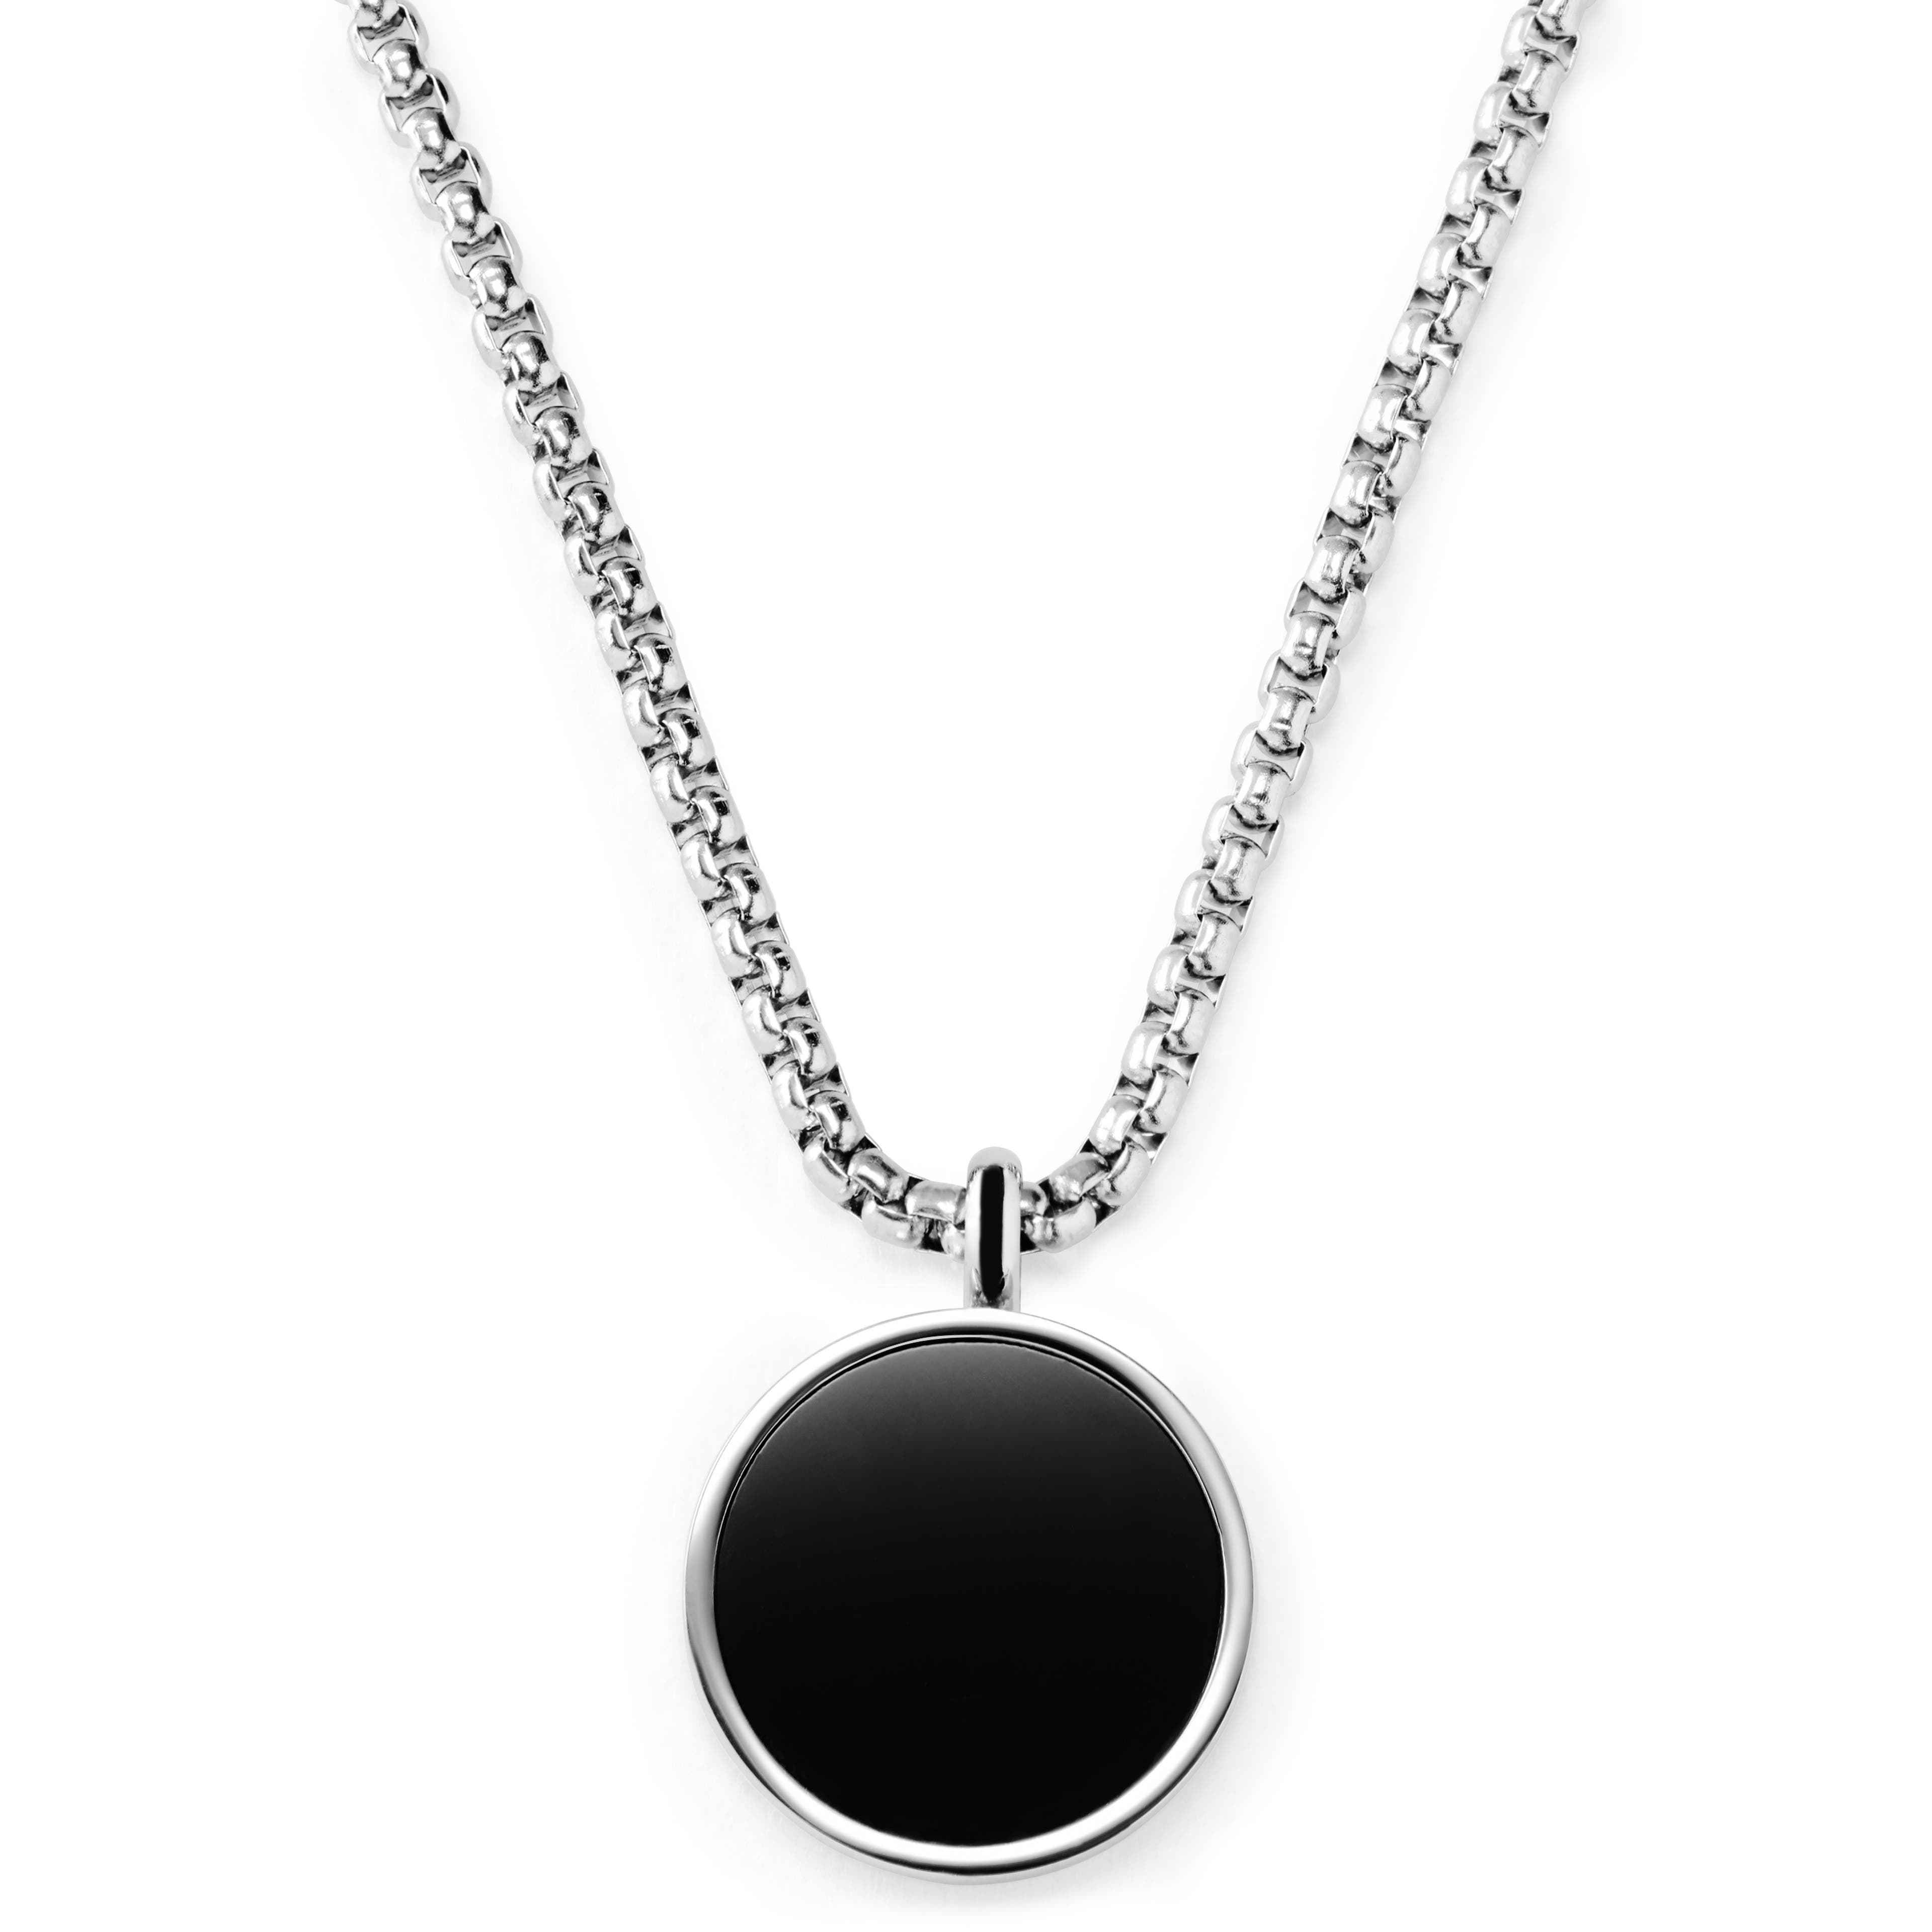 Orisun | Silver-Tone Stainless Steel & Black Onyx Circle Chain Necklace